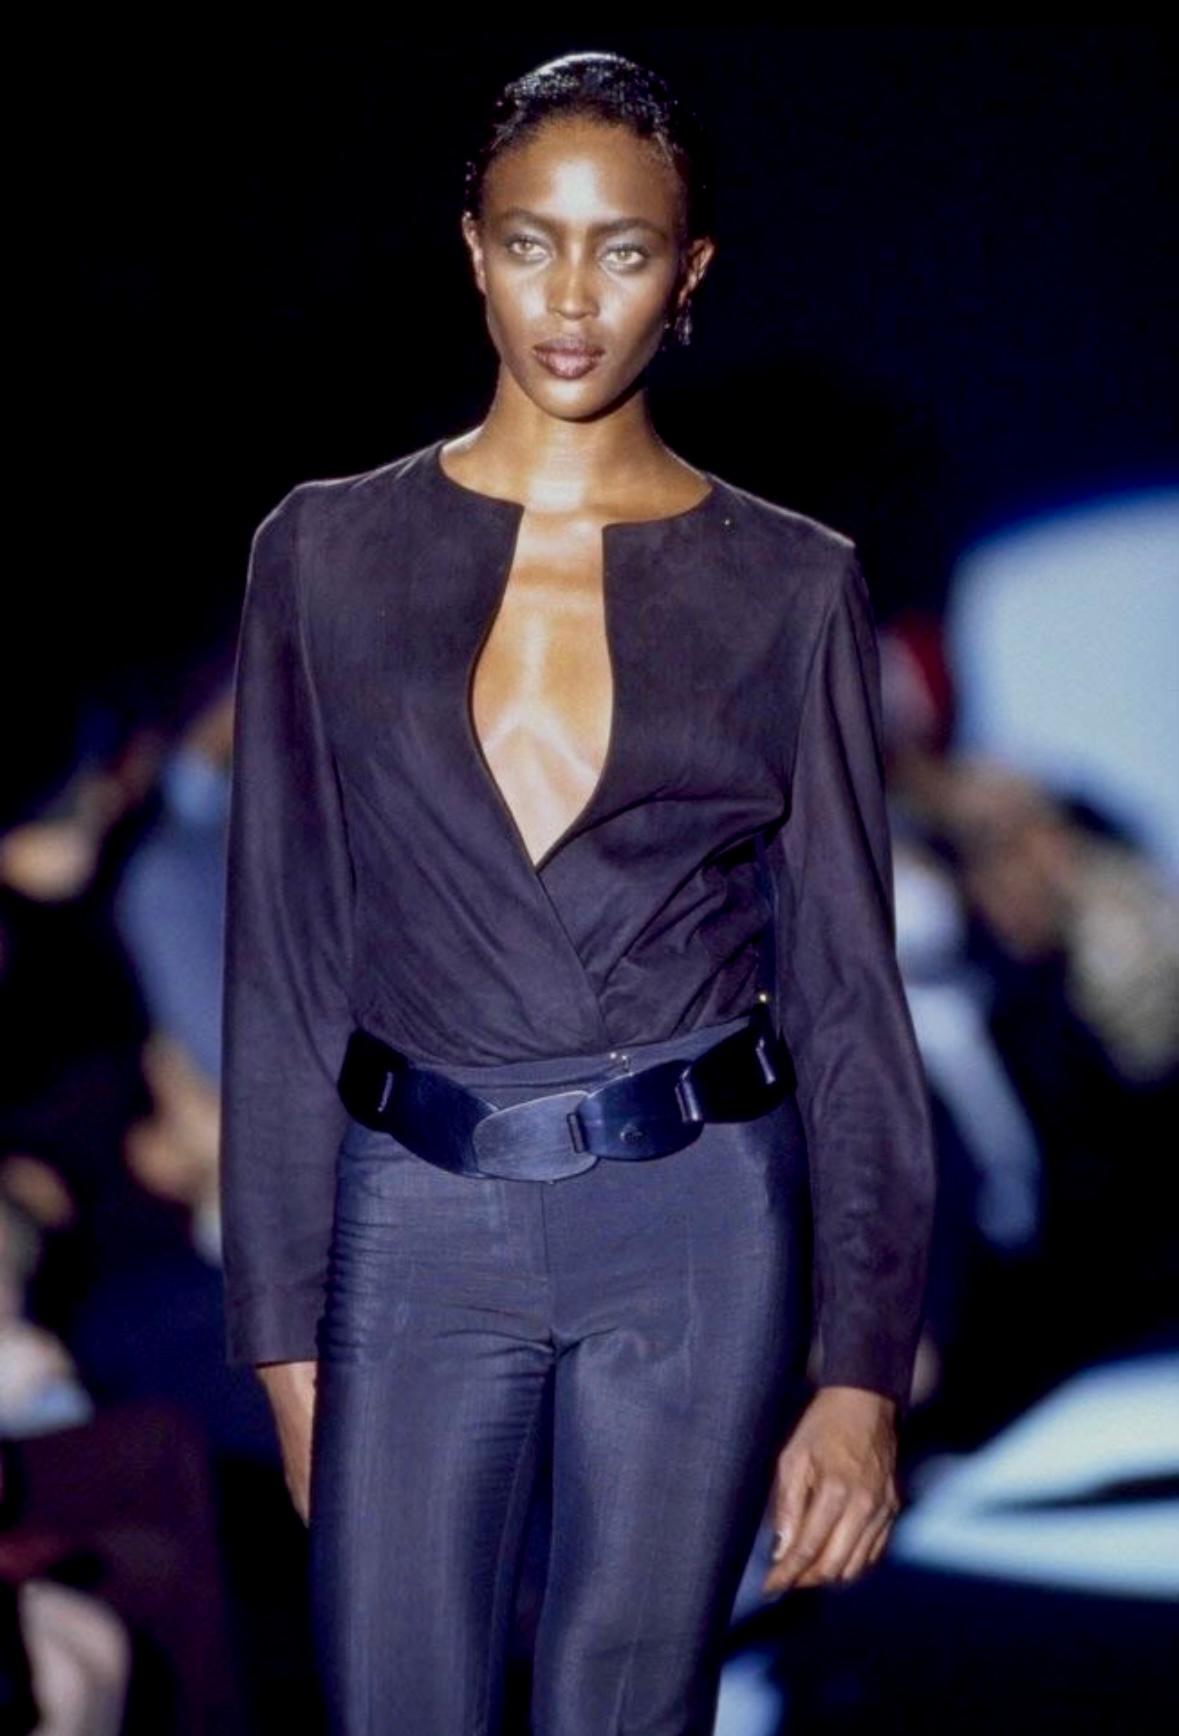 Presenting a fabulous brown suede Gucci open blouse/jacket, designed by Tom Ford. From the Spring/Summer 1997 collection, this beautiful blouse or jacket debuted on the season's runway modeled by Naomi Campbell. Constructed entirely of dark brown